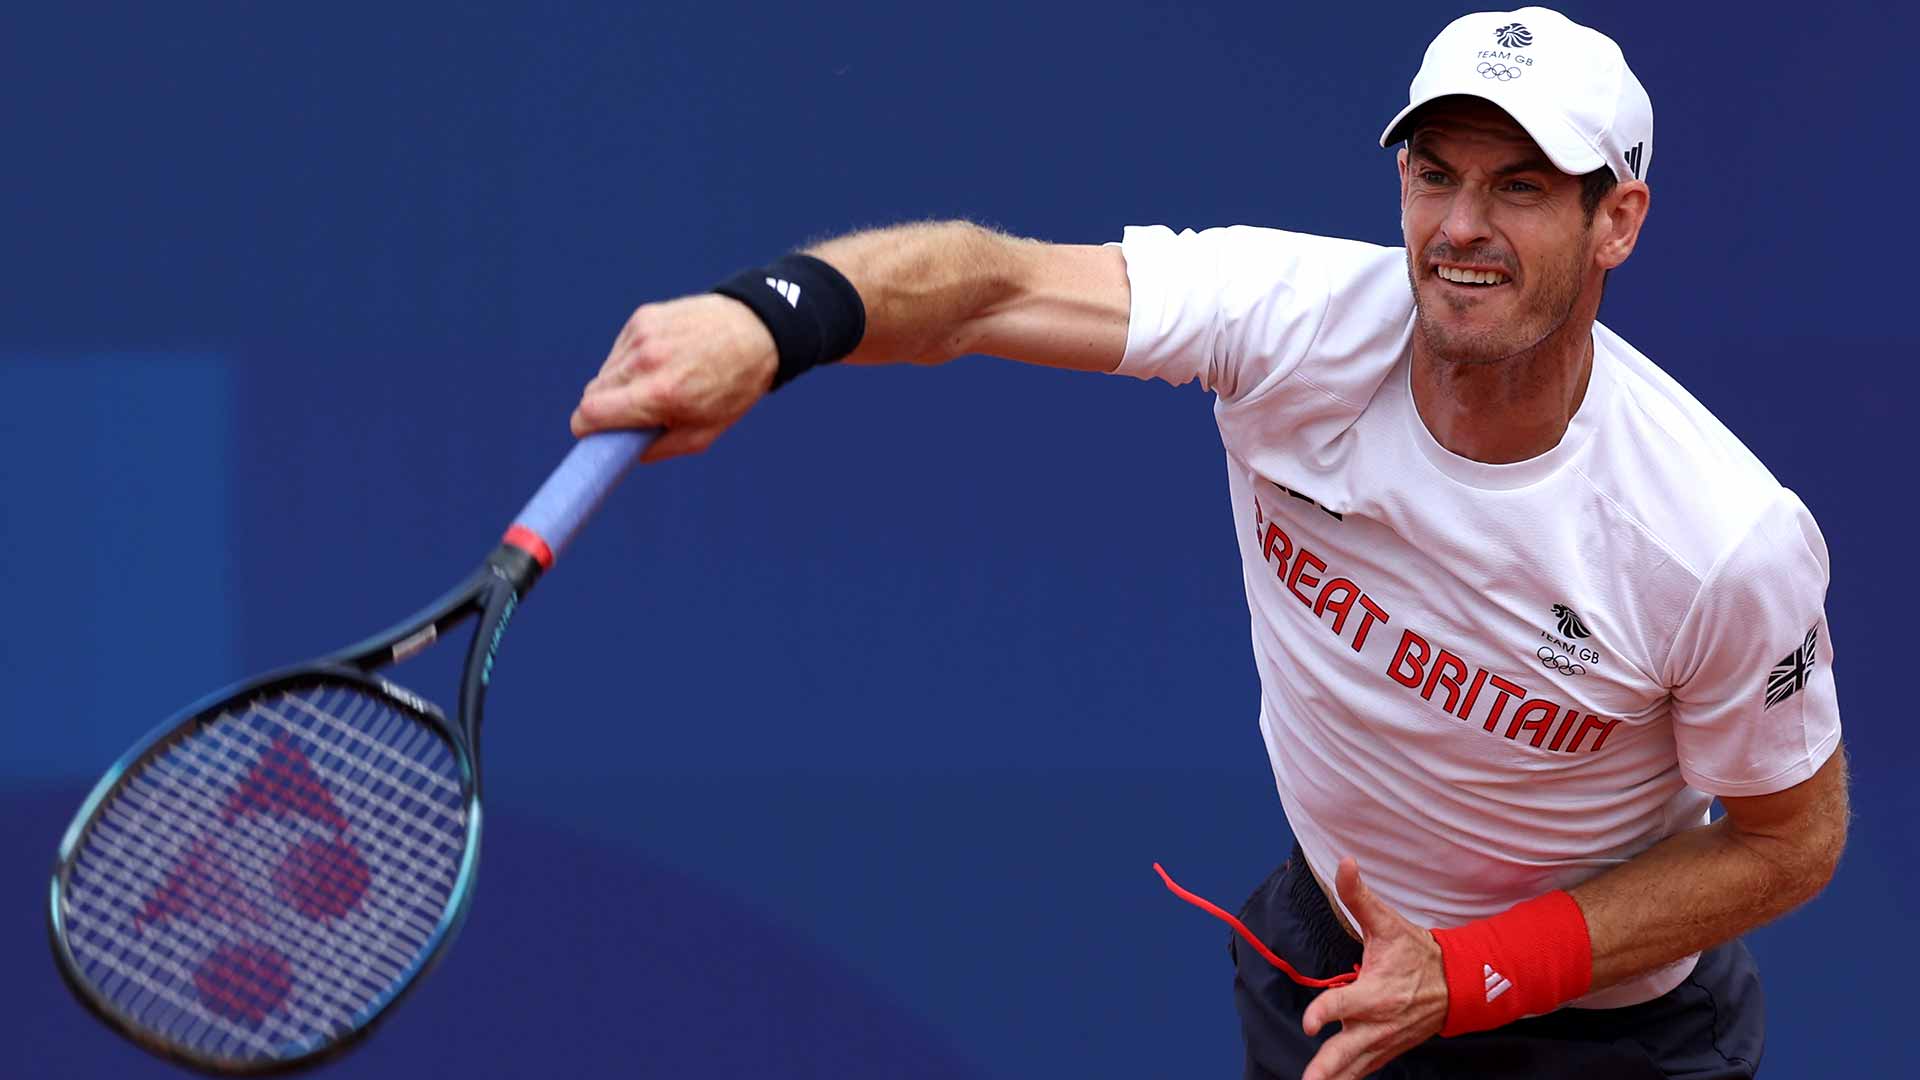 Andy Murray won singles gold at the Olympics in 2012 and 2016.